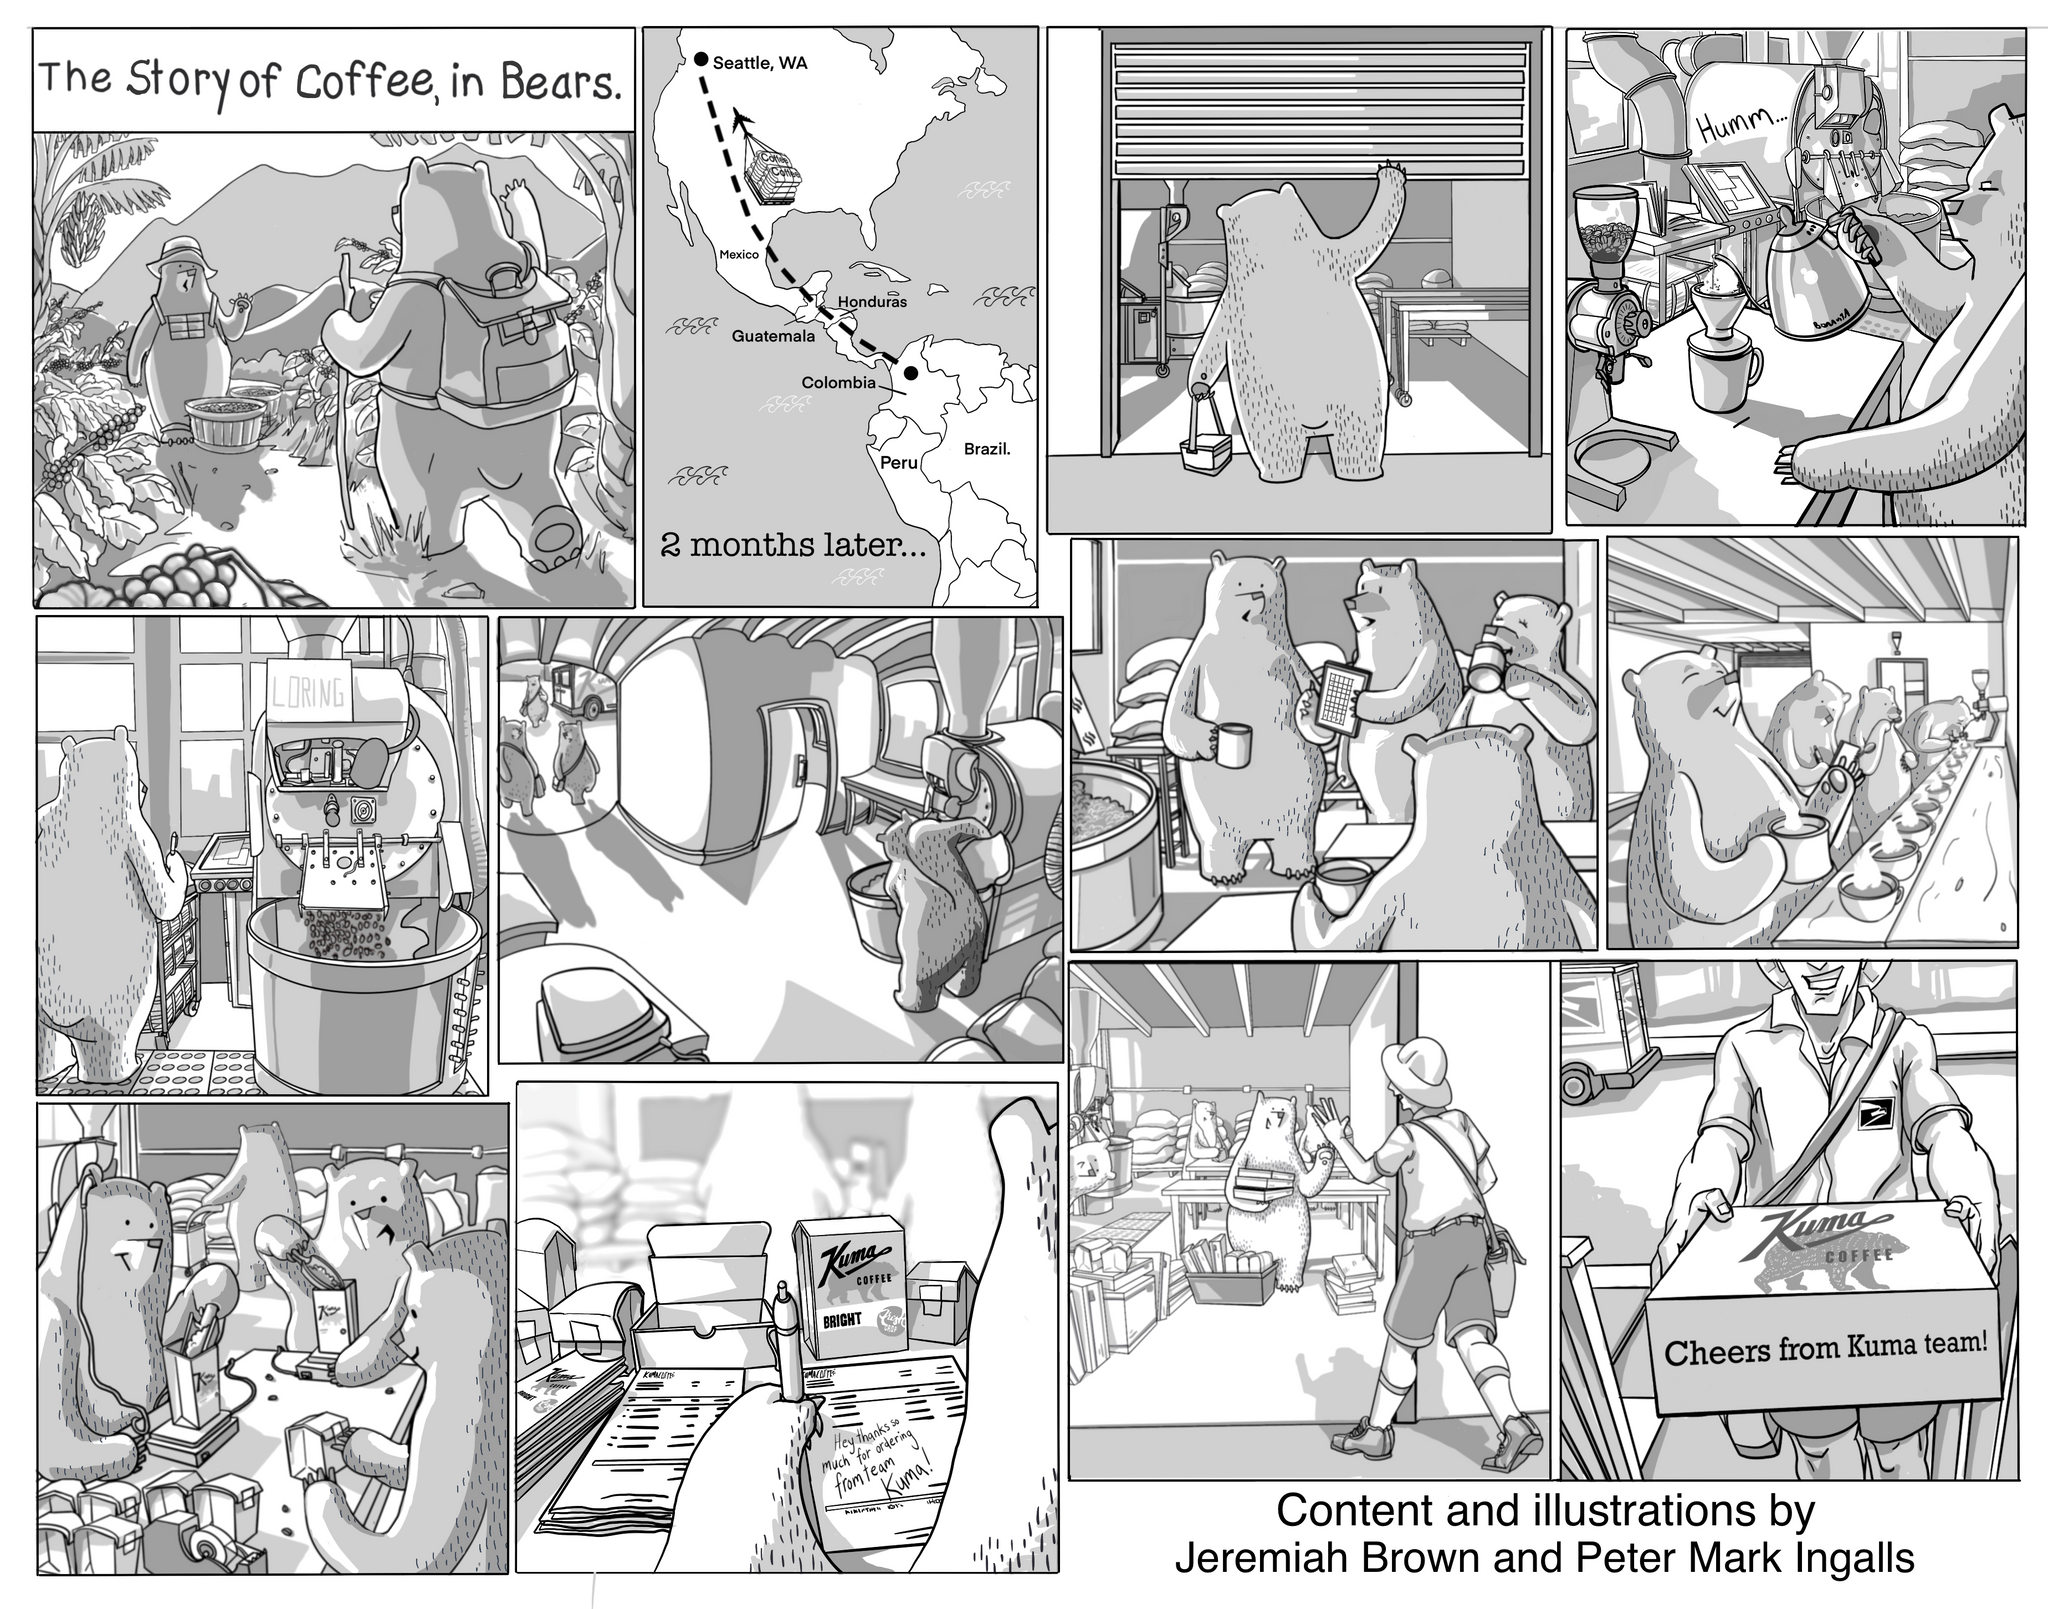 a hand drawn comic of the story of coffee, showing bear characters sourcing coffee, coffee shipping, scenes from a roastery where characters roast, pack and taste coffee. Finally the coffee going in a package and shipping with USPS to your home